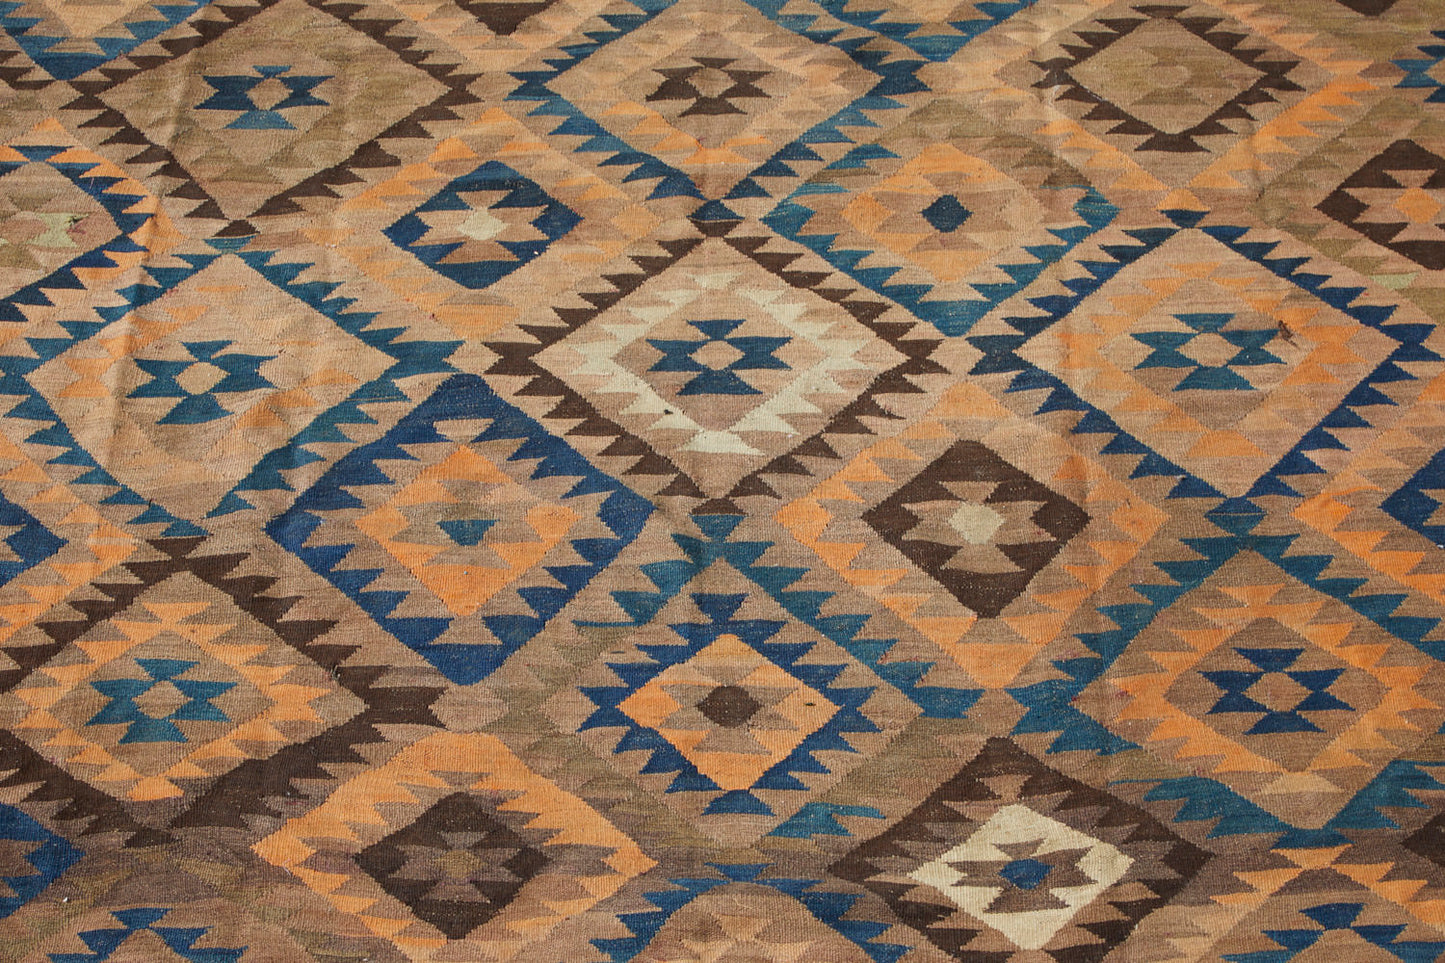 Maimana Turkish Kilim area rug with tan, beige and brown earthy tones, along with blue, cream and peach geometric patterns. Hand woven large area rug - Available from King Kennedy Rugs Los Angeles